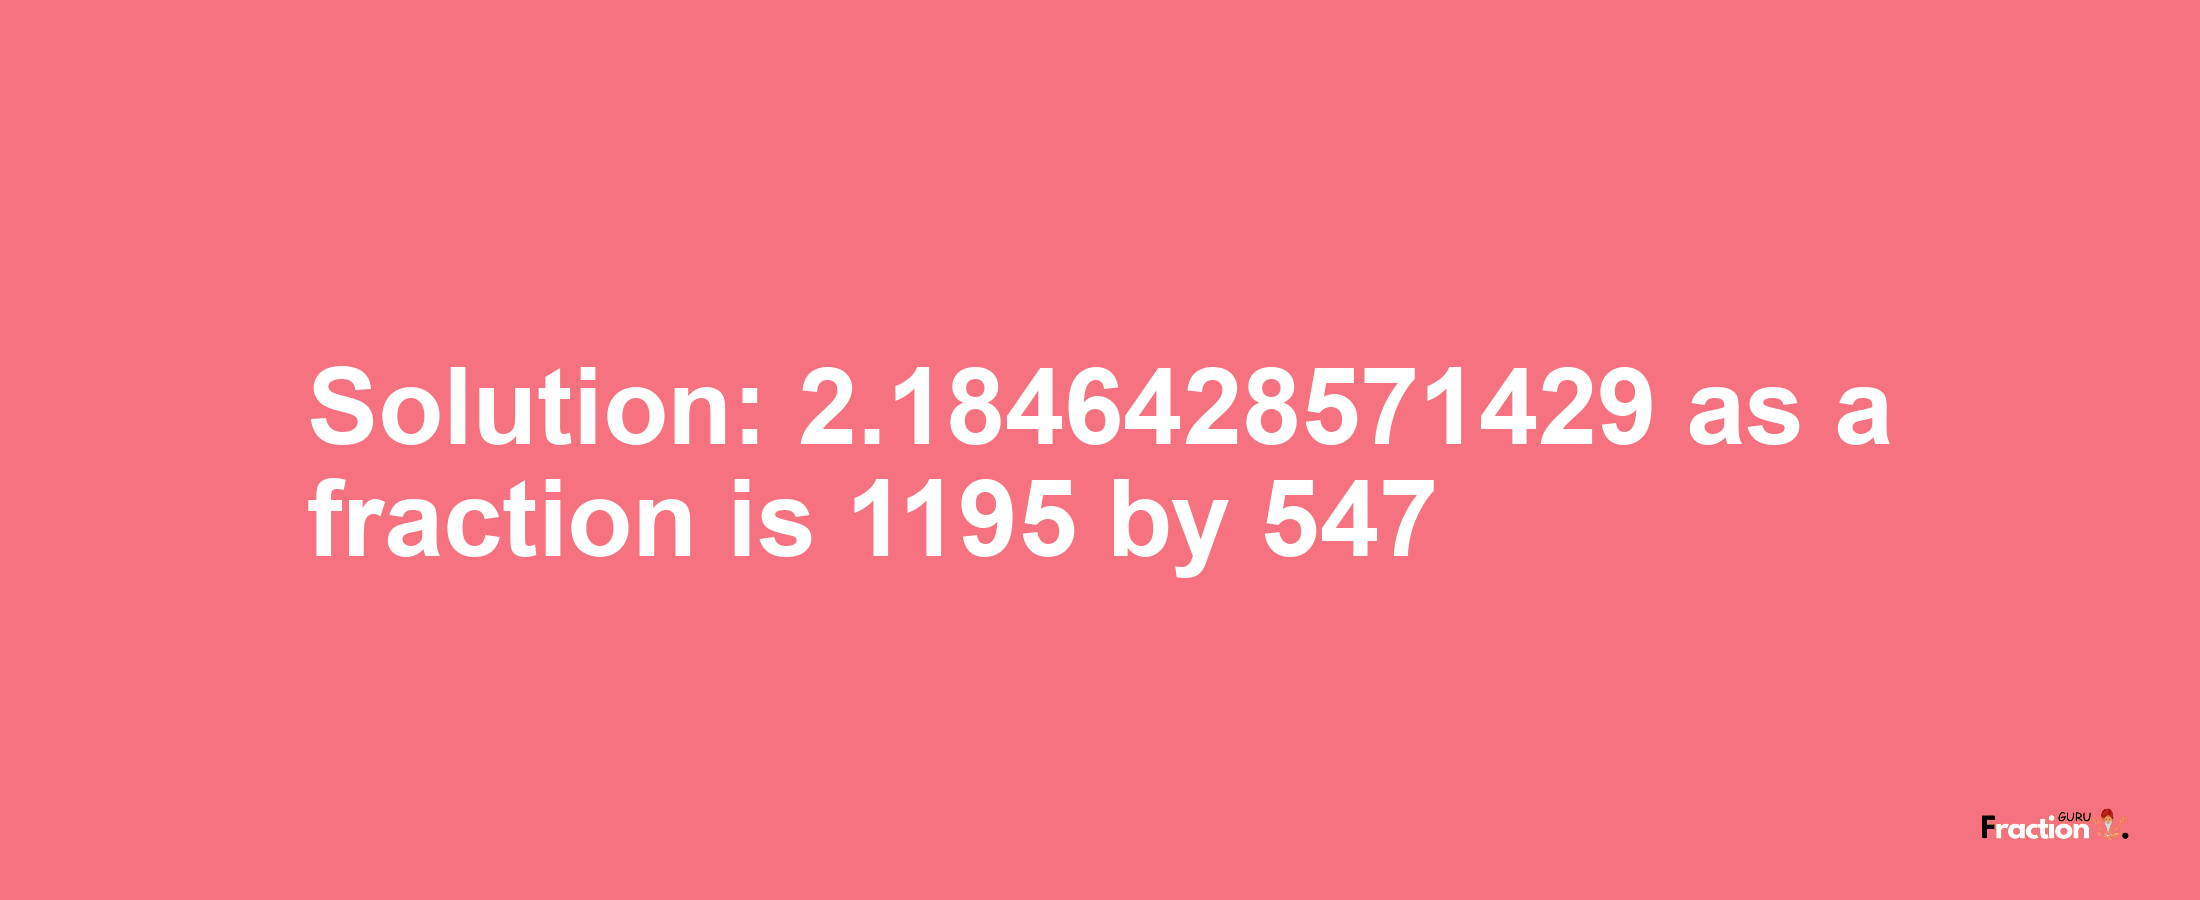 Solution:2.1846428571429 as a fraction is 1195/547